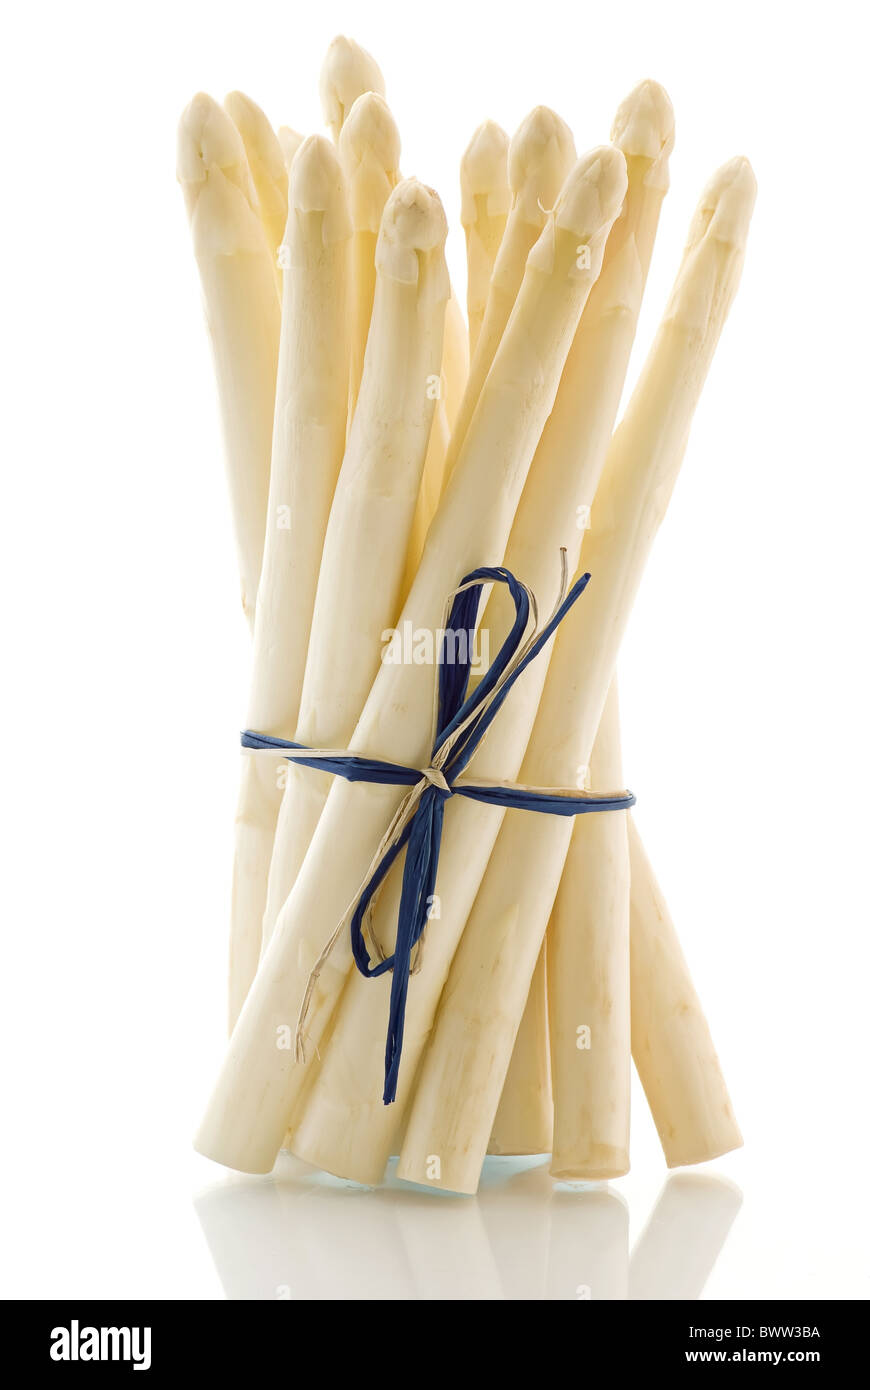 Bunch of white asparagus as closeup on white background Stock Photo